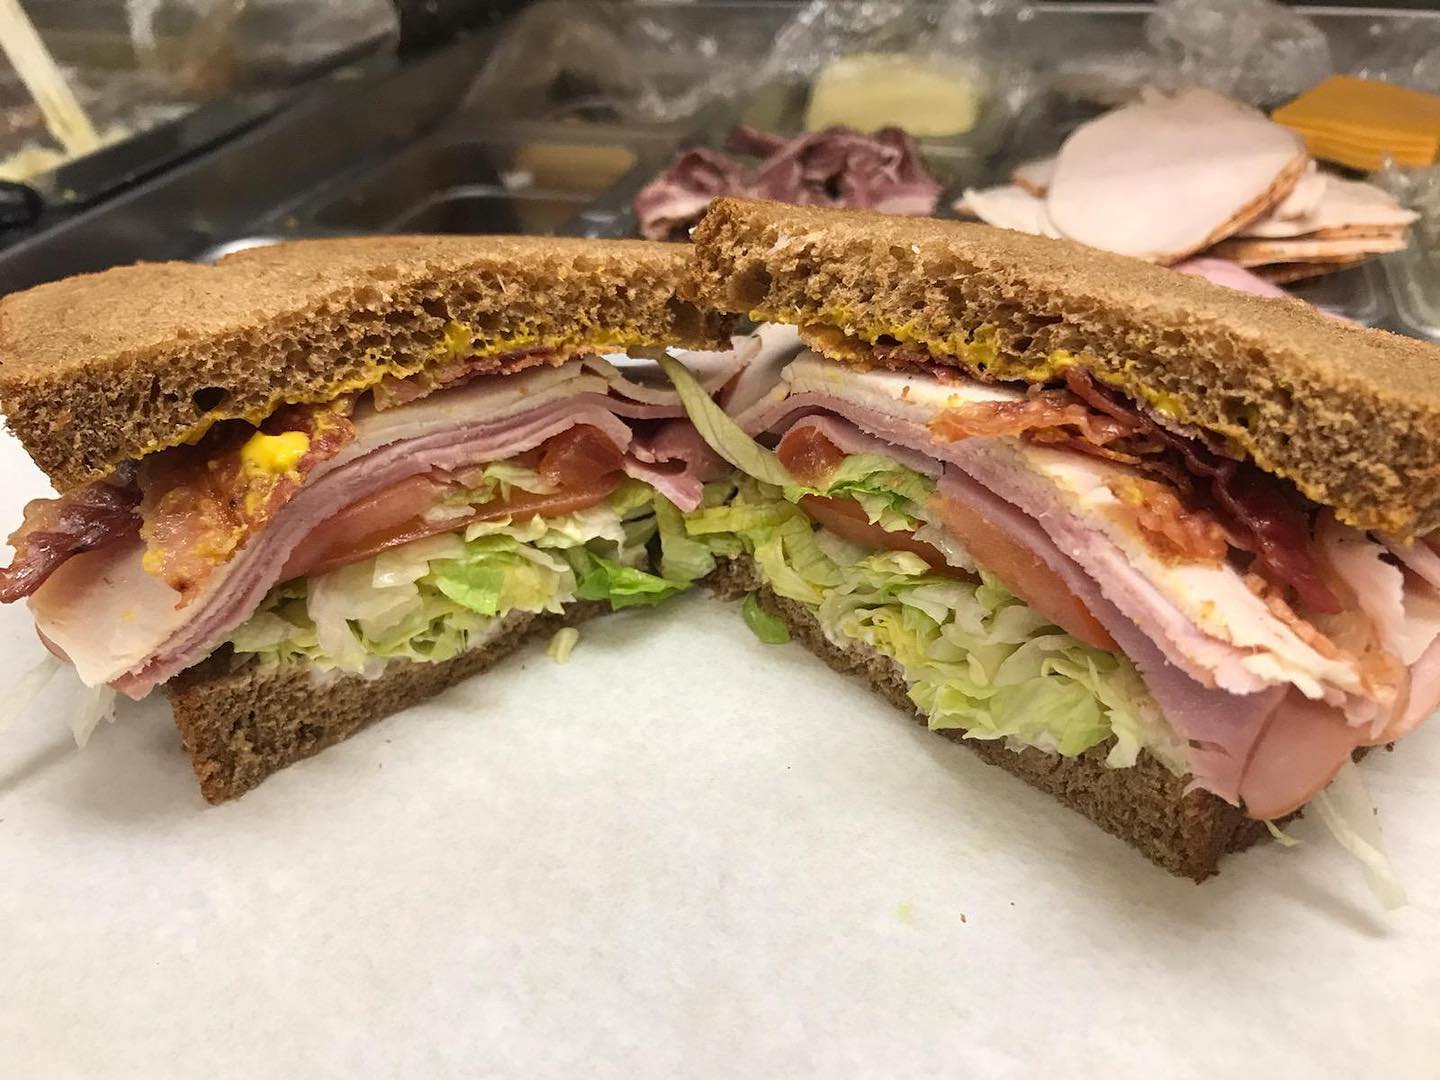 Best liquor store sandwiches in San Diego featuring Jack's Club from Cozines Liquor and Deli in National City